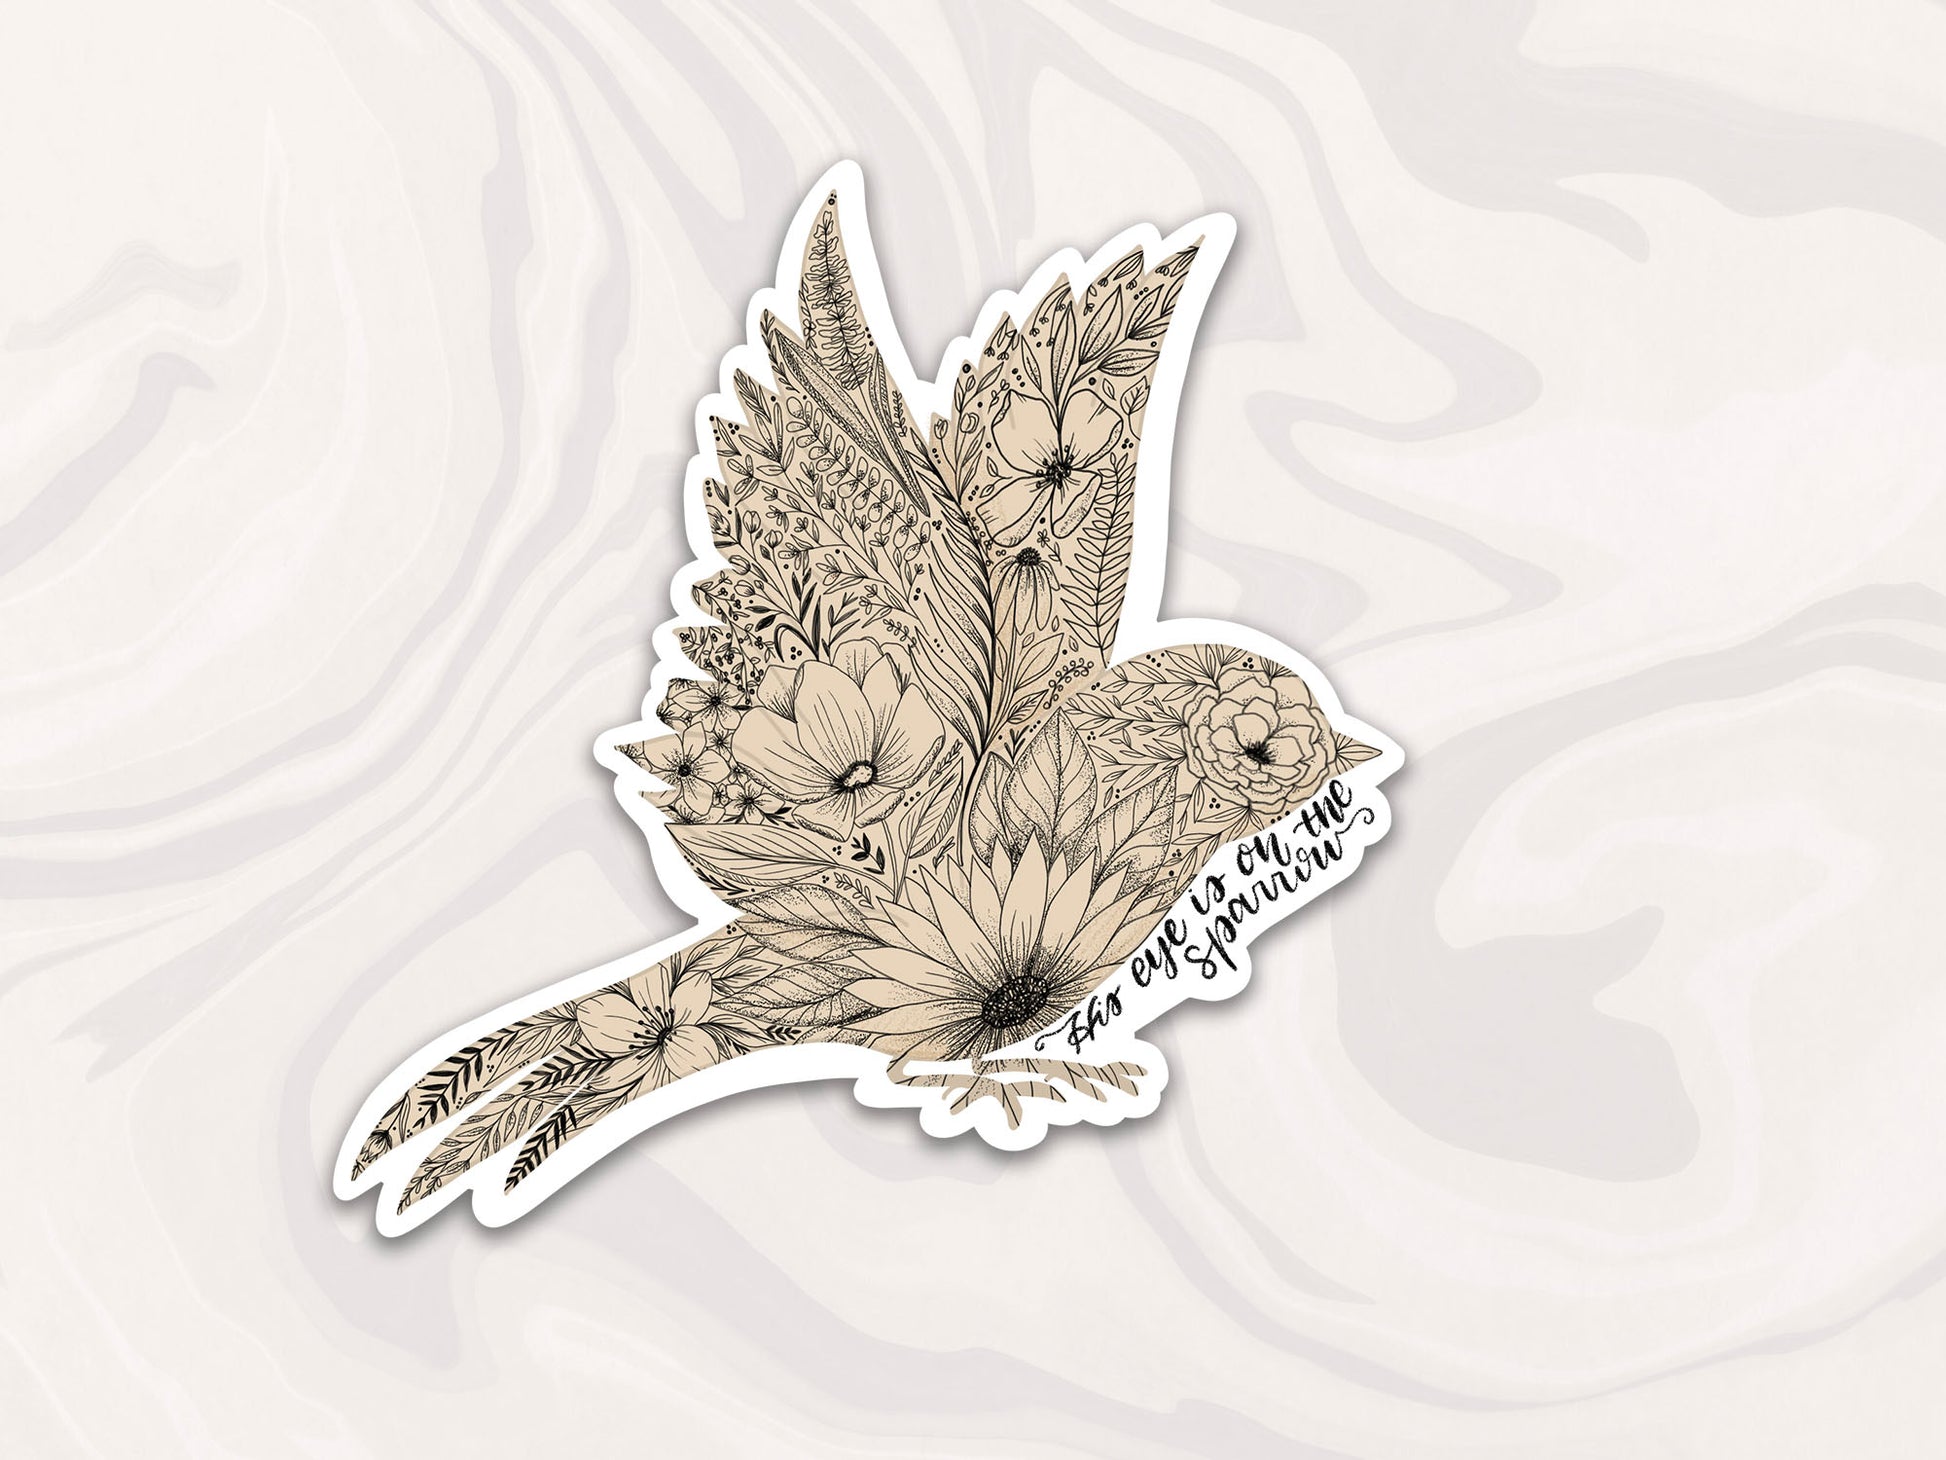 flower line drawing within a sparrow bird outline sticker with His Eye is on the Sparrow text